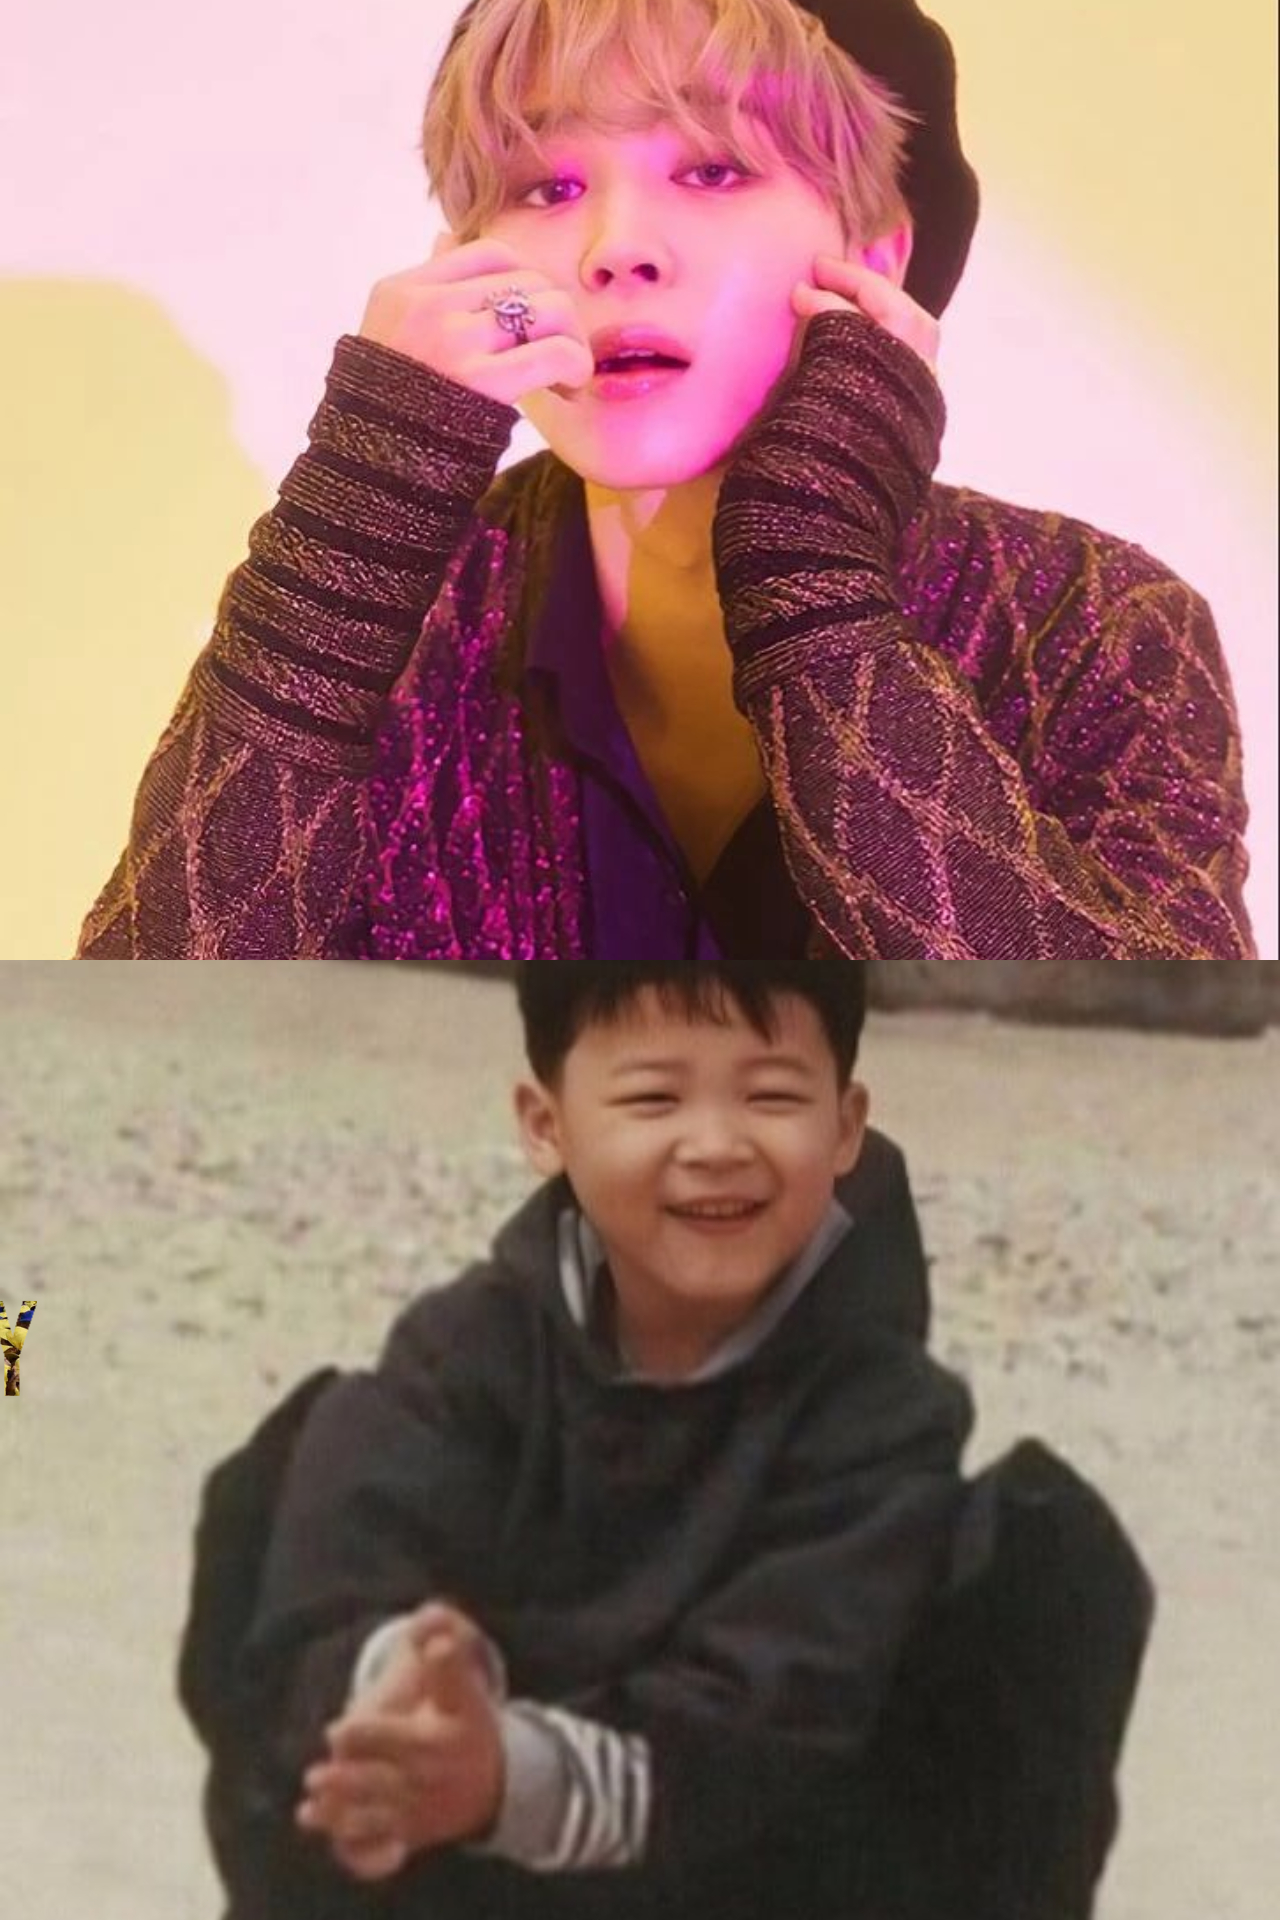 BTS Jimin's rare and unseen childhood photos will melt your heart. Have a look